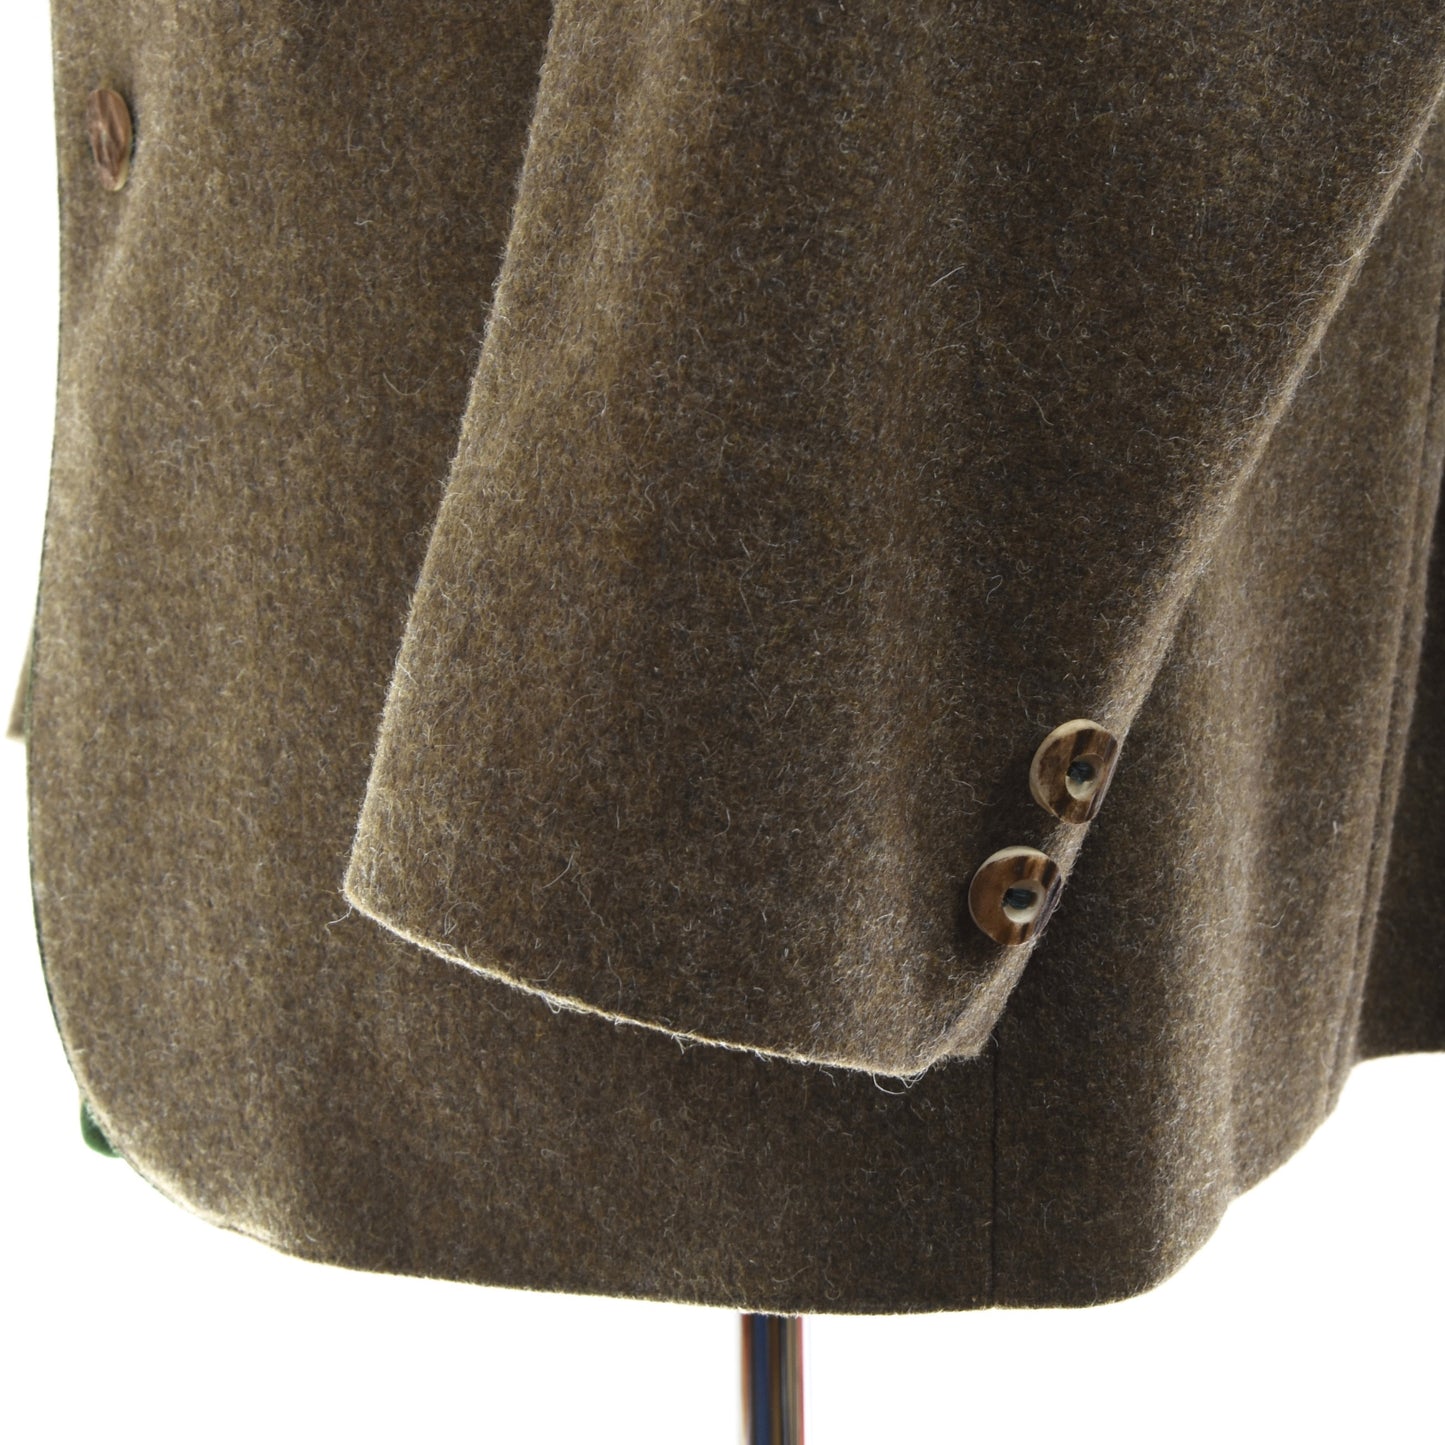 Classic 100% Wool Janker/Jacket Size 50 - Brown